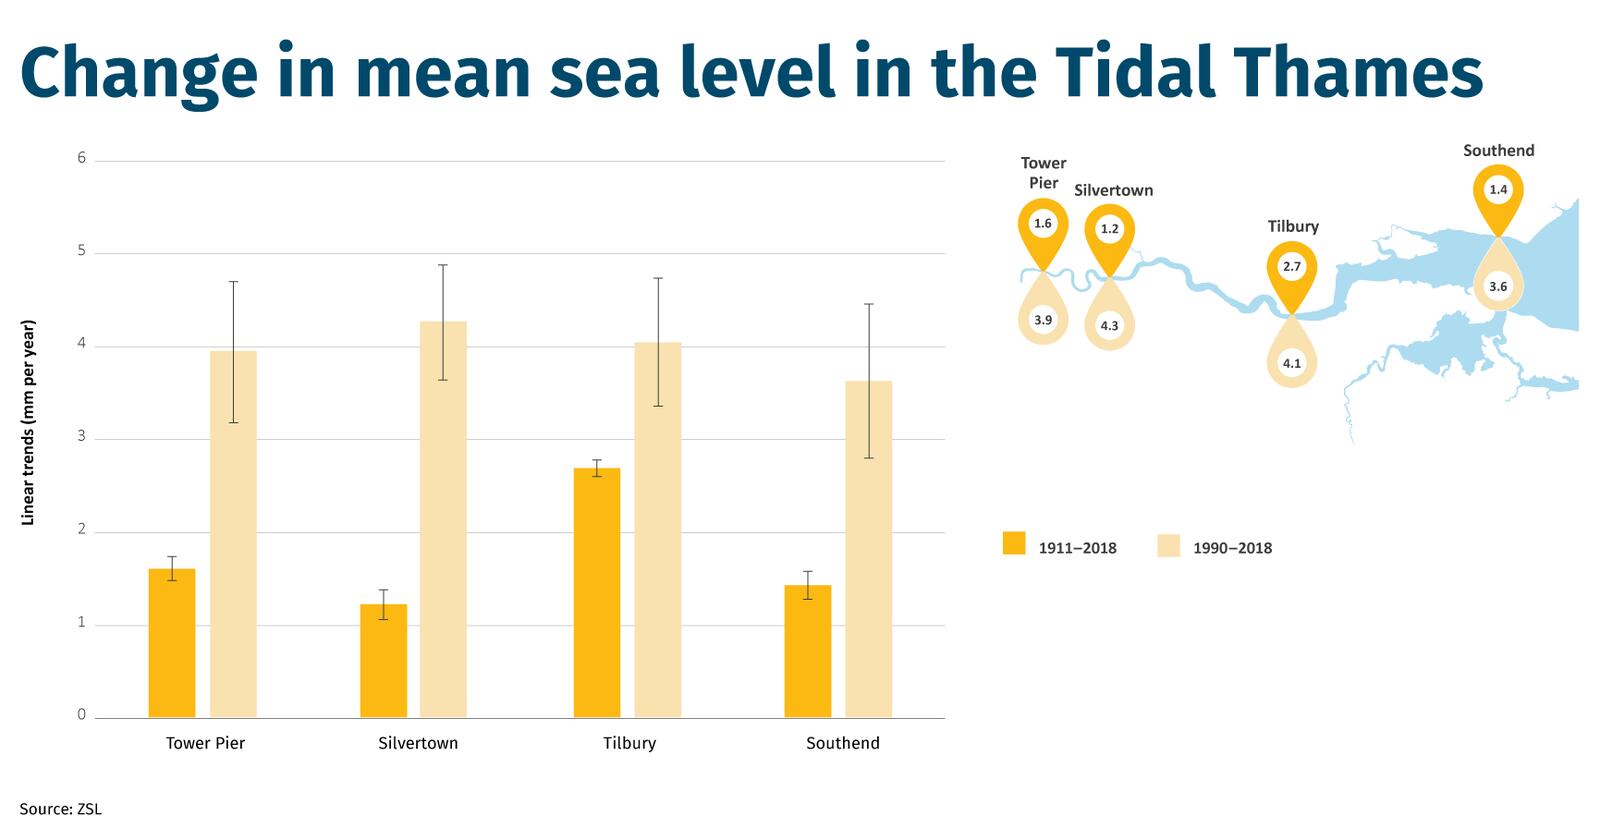 Change in mean sea level in the Tidal Thames